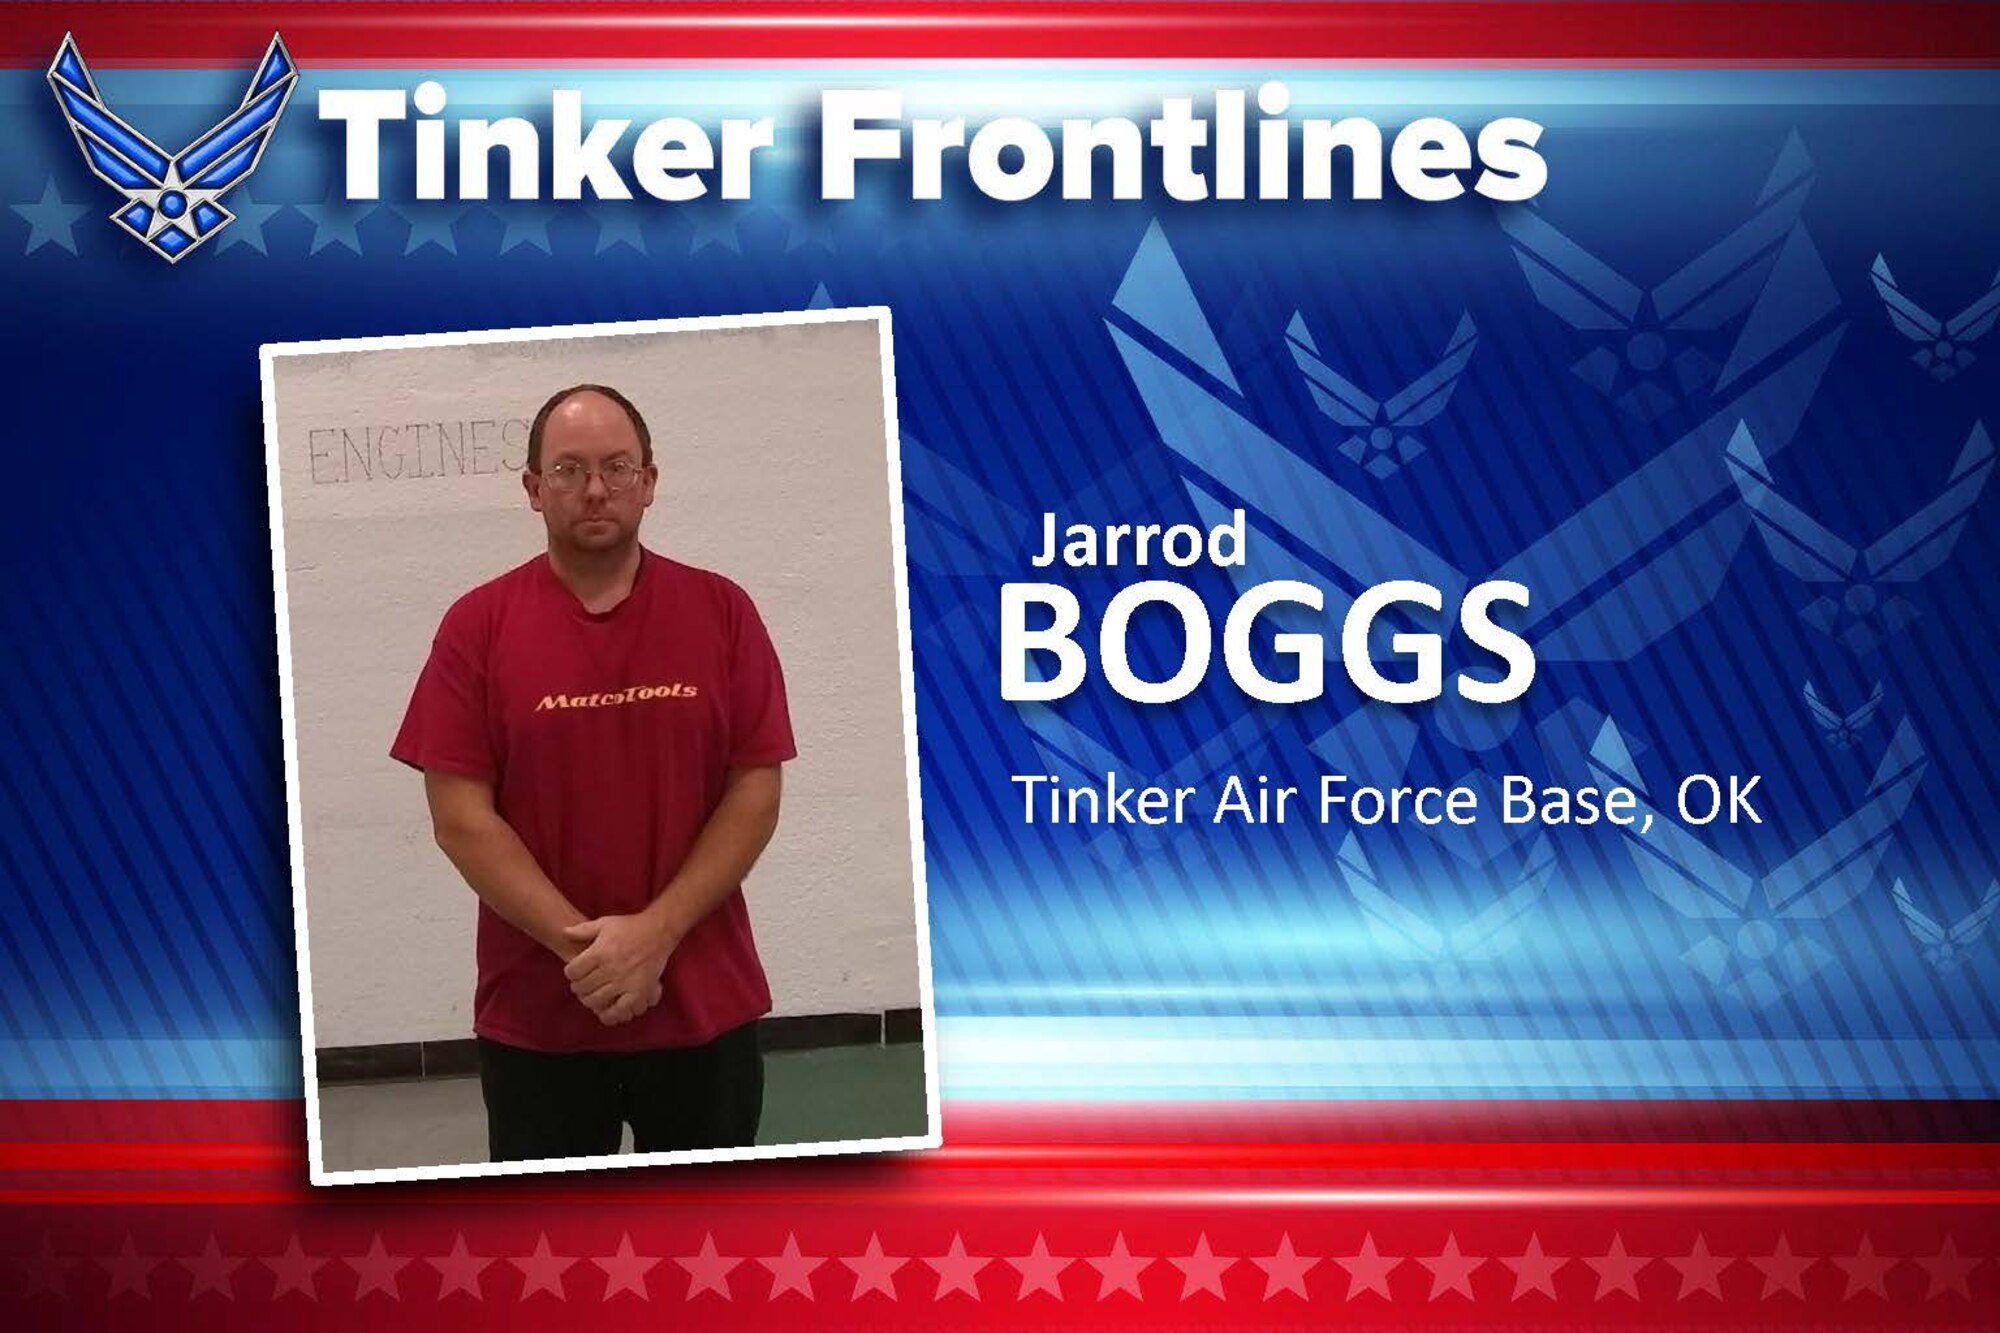 Graphic of Tinker Frontlines with photo of man in red shirt looking into camera